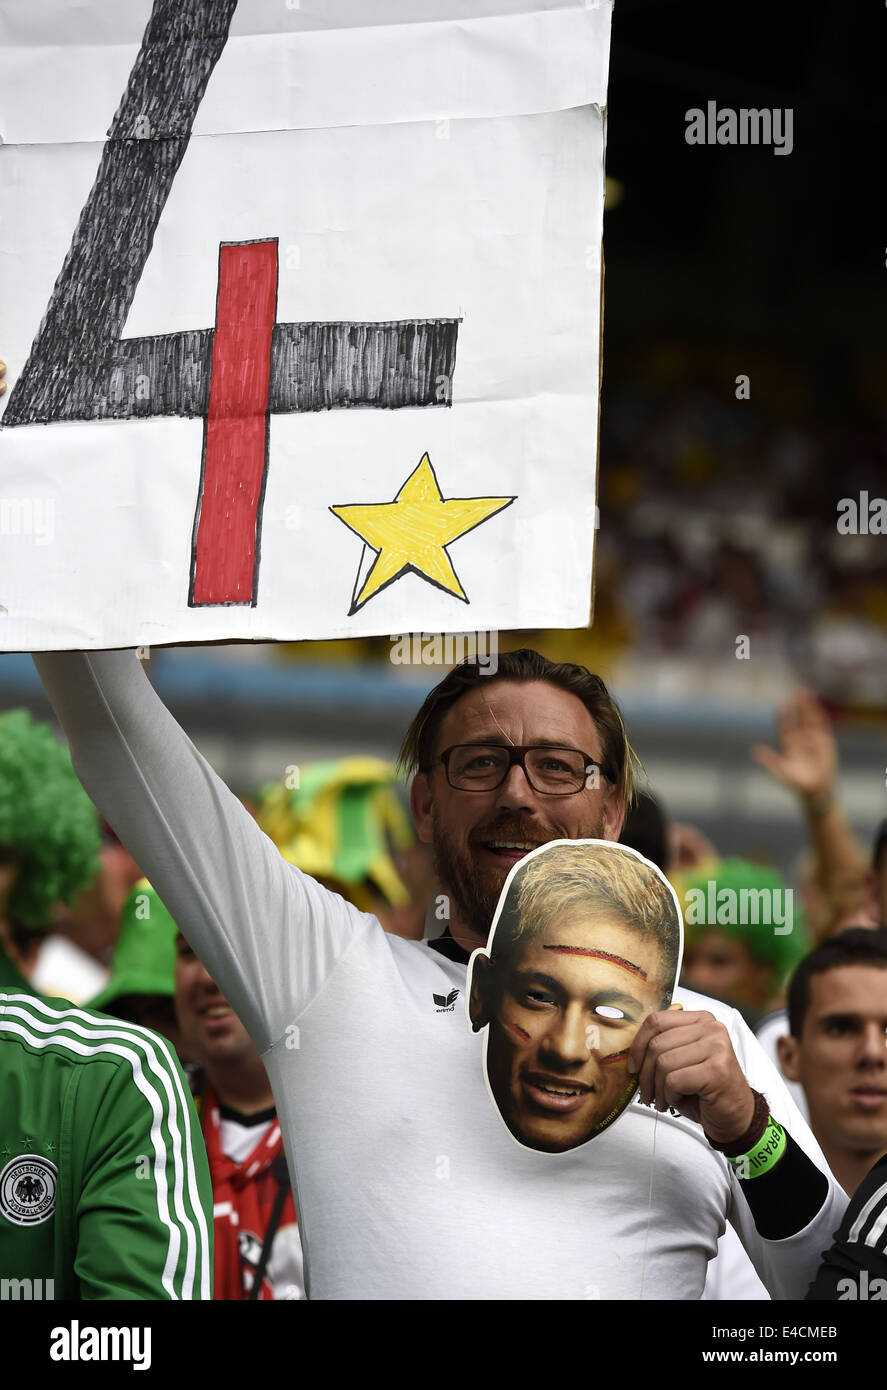 Belo Horizonte, Brazil. 8th July, 2014. A Germany's supporter holds a banner and a mask of Brazil's Neymar before a semifinal match between Brazil and Germany of 2014 FIFA World Cup at the Estadio Mineirao Stadium in Belo Horizonte, Brazil, on July 8, 2014. Credit:  Qi Heng/Xinhua/Alamy Live News Stock Photo